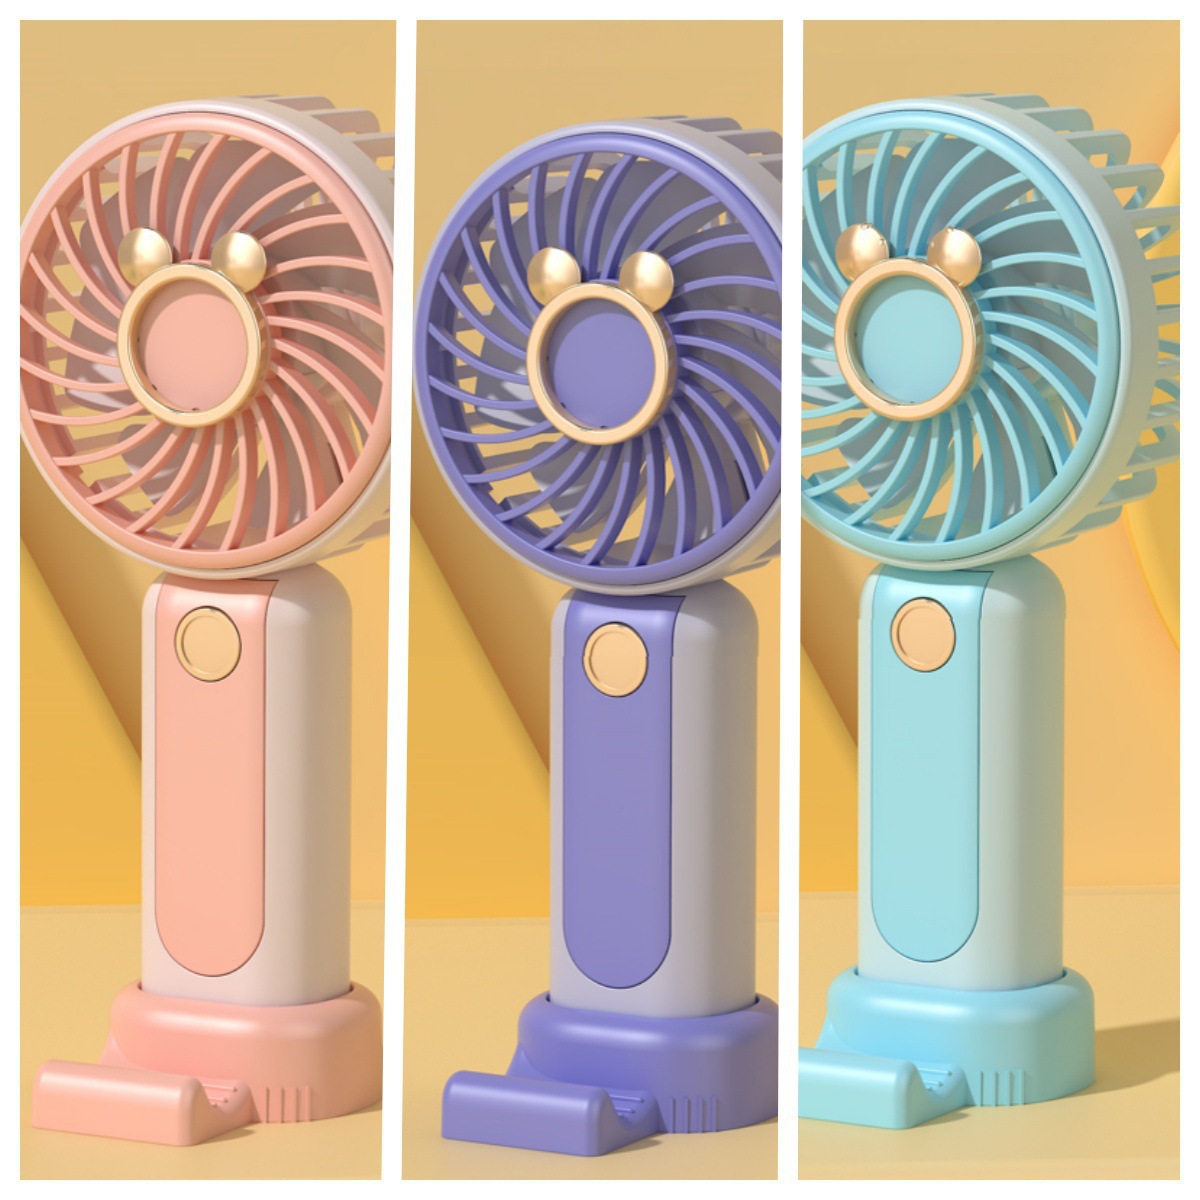 New Cartoon Handheld Fan Usb Rechargeable Small Fan Portable Portable Household Mini Small Electric Fan Student Gift